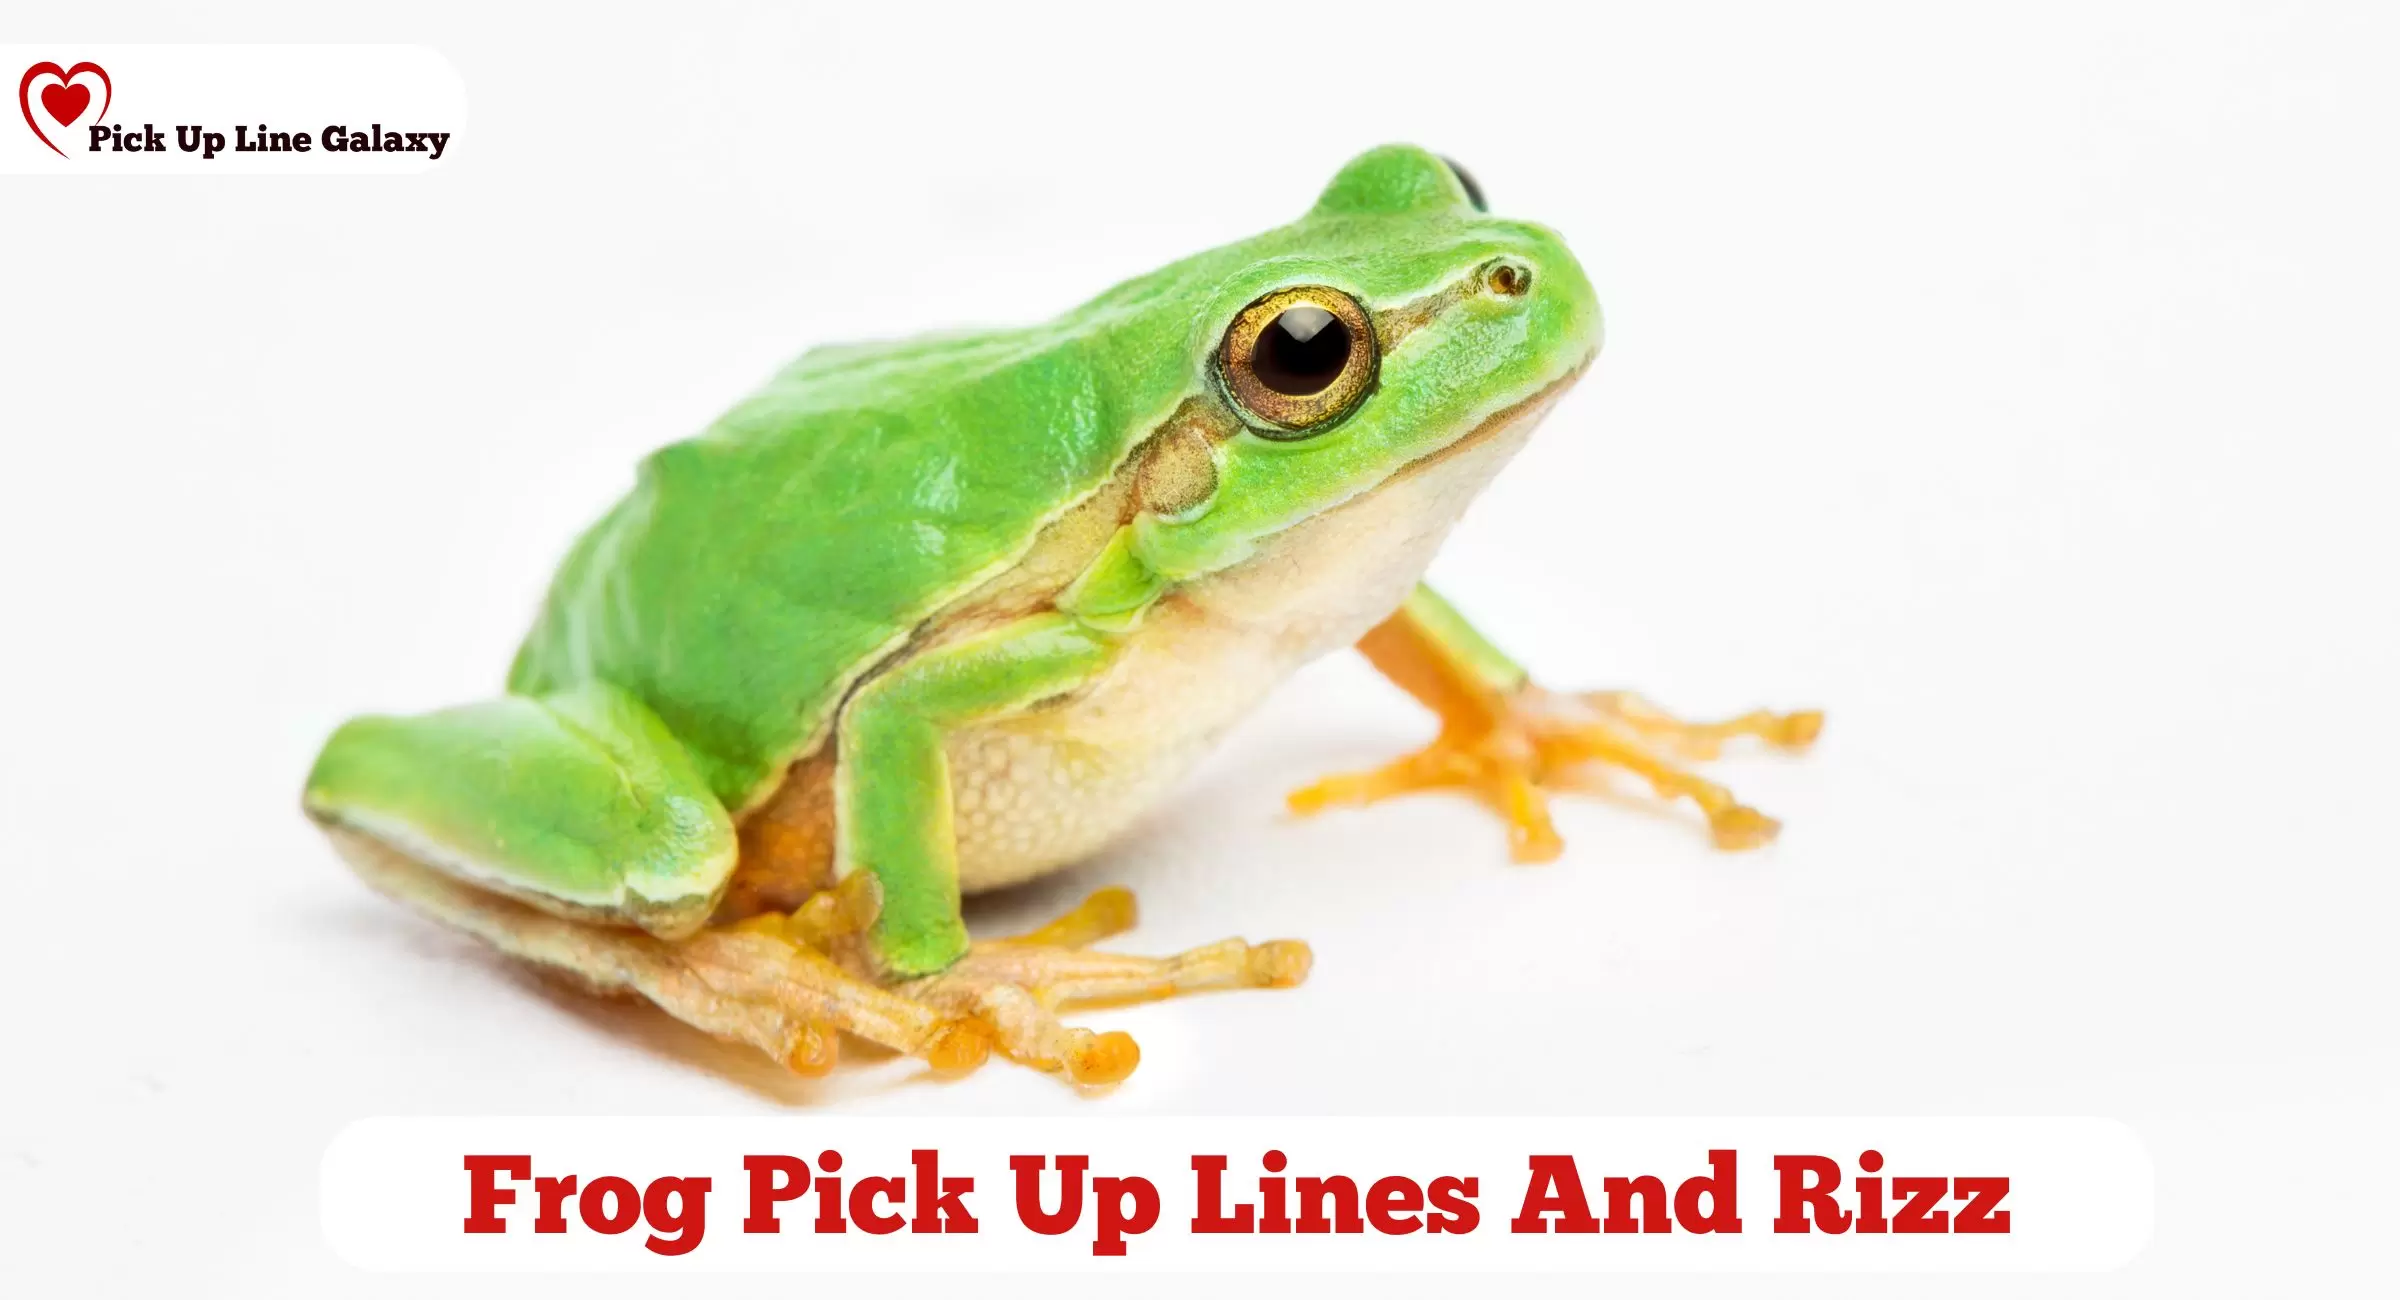 Frog Pick Up Lines And Rizz